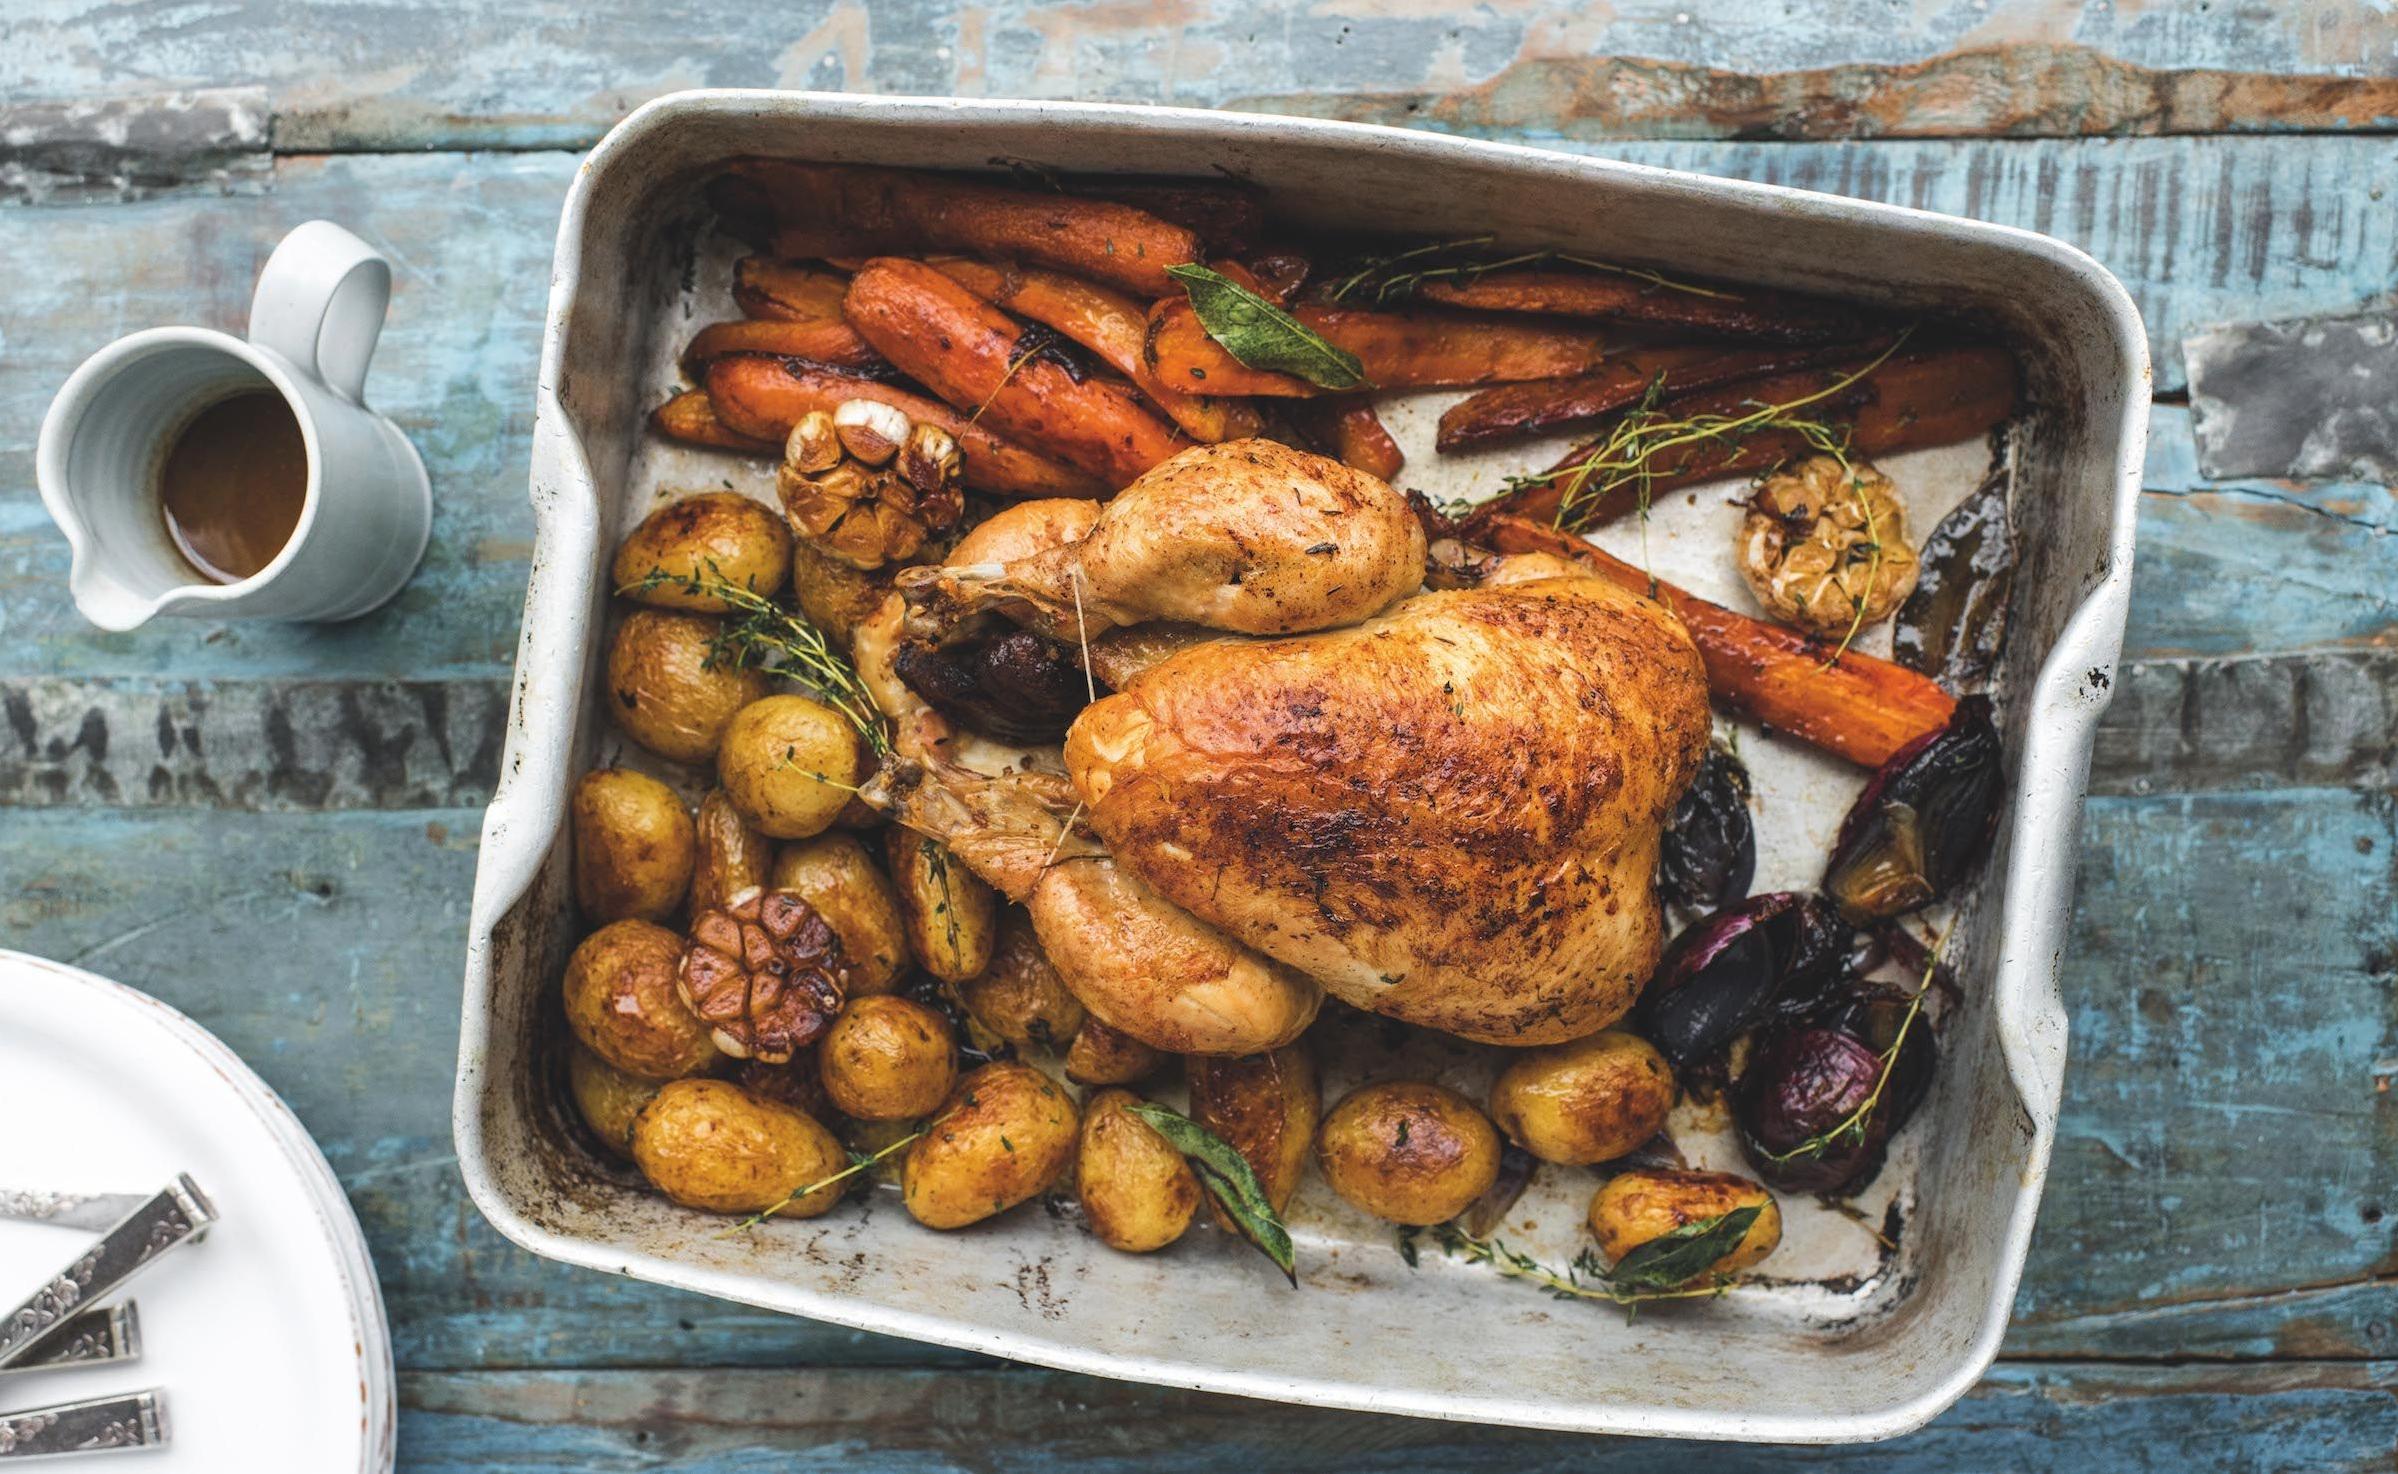  The juiciest roast chicken you'll ever have!